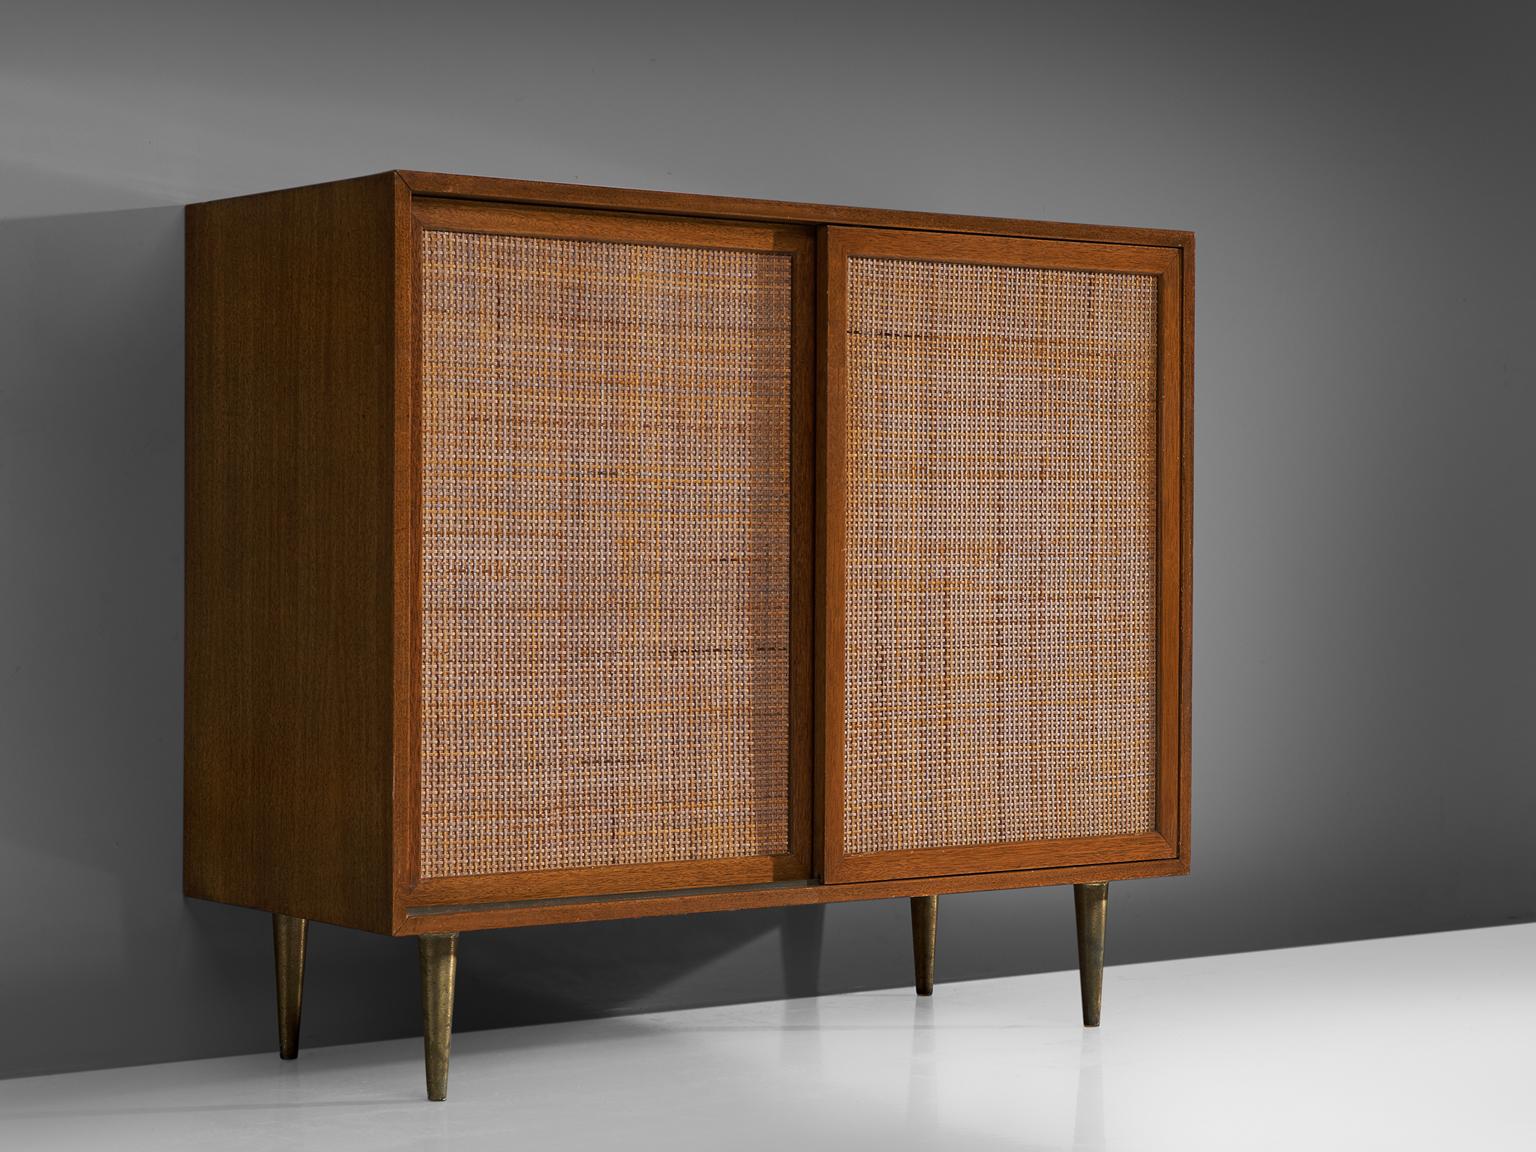 Harvey Probber, cabinet, rattan, mahogany and brass, United States, 1950s. 

This piece by Probber features a mahogany body. The mahogany functions as a frame for the rattan doors. The cabinet features two shelves and rests on four delicate